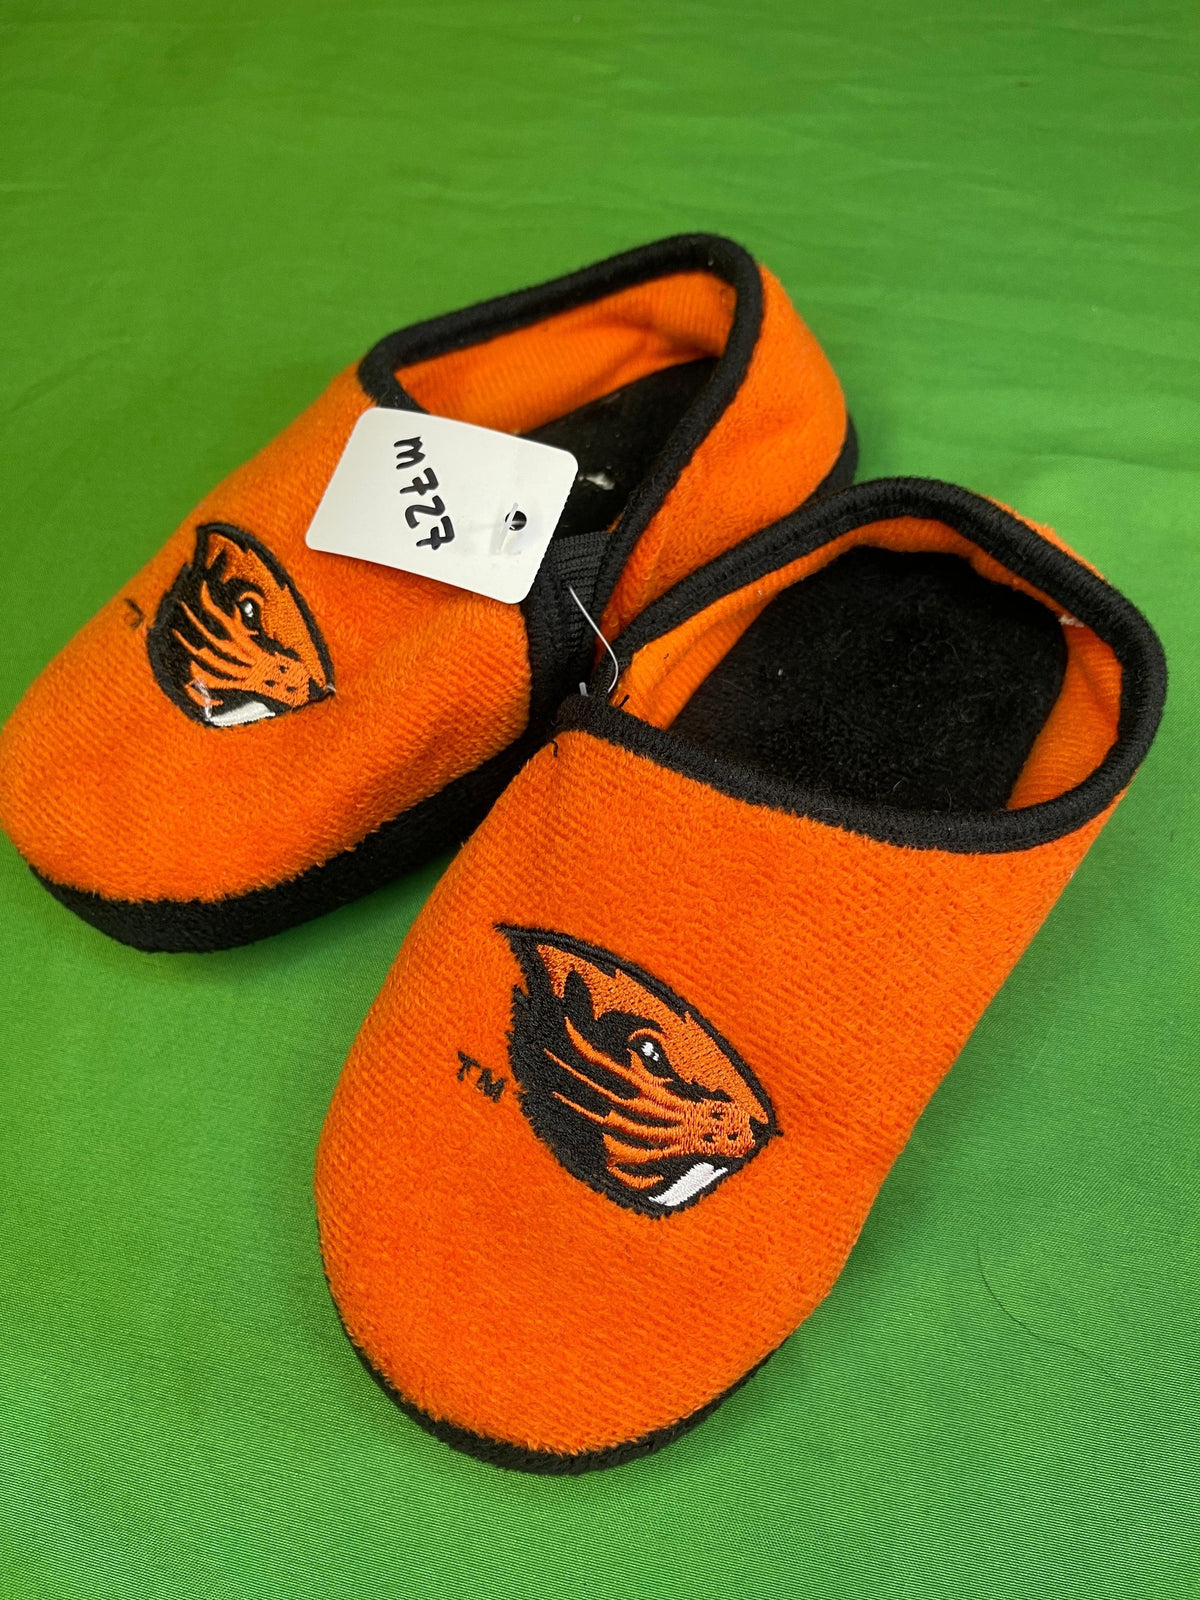 NCAA Oregon State Beavers Slippers House Shoes Youth UK Size 4 approx.